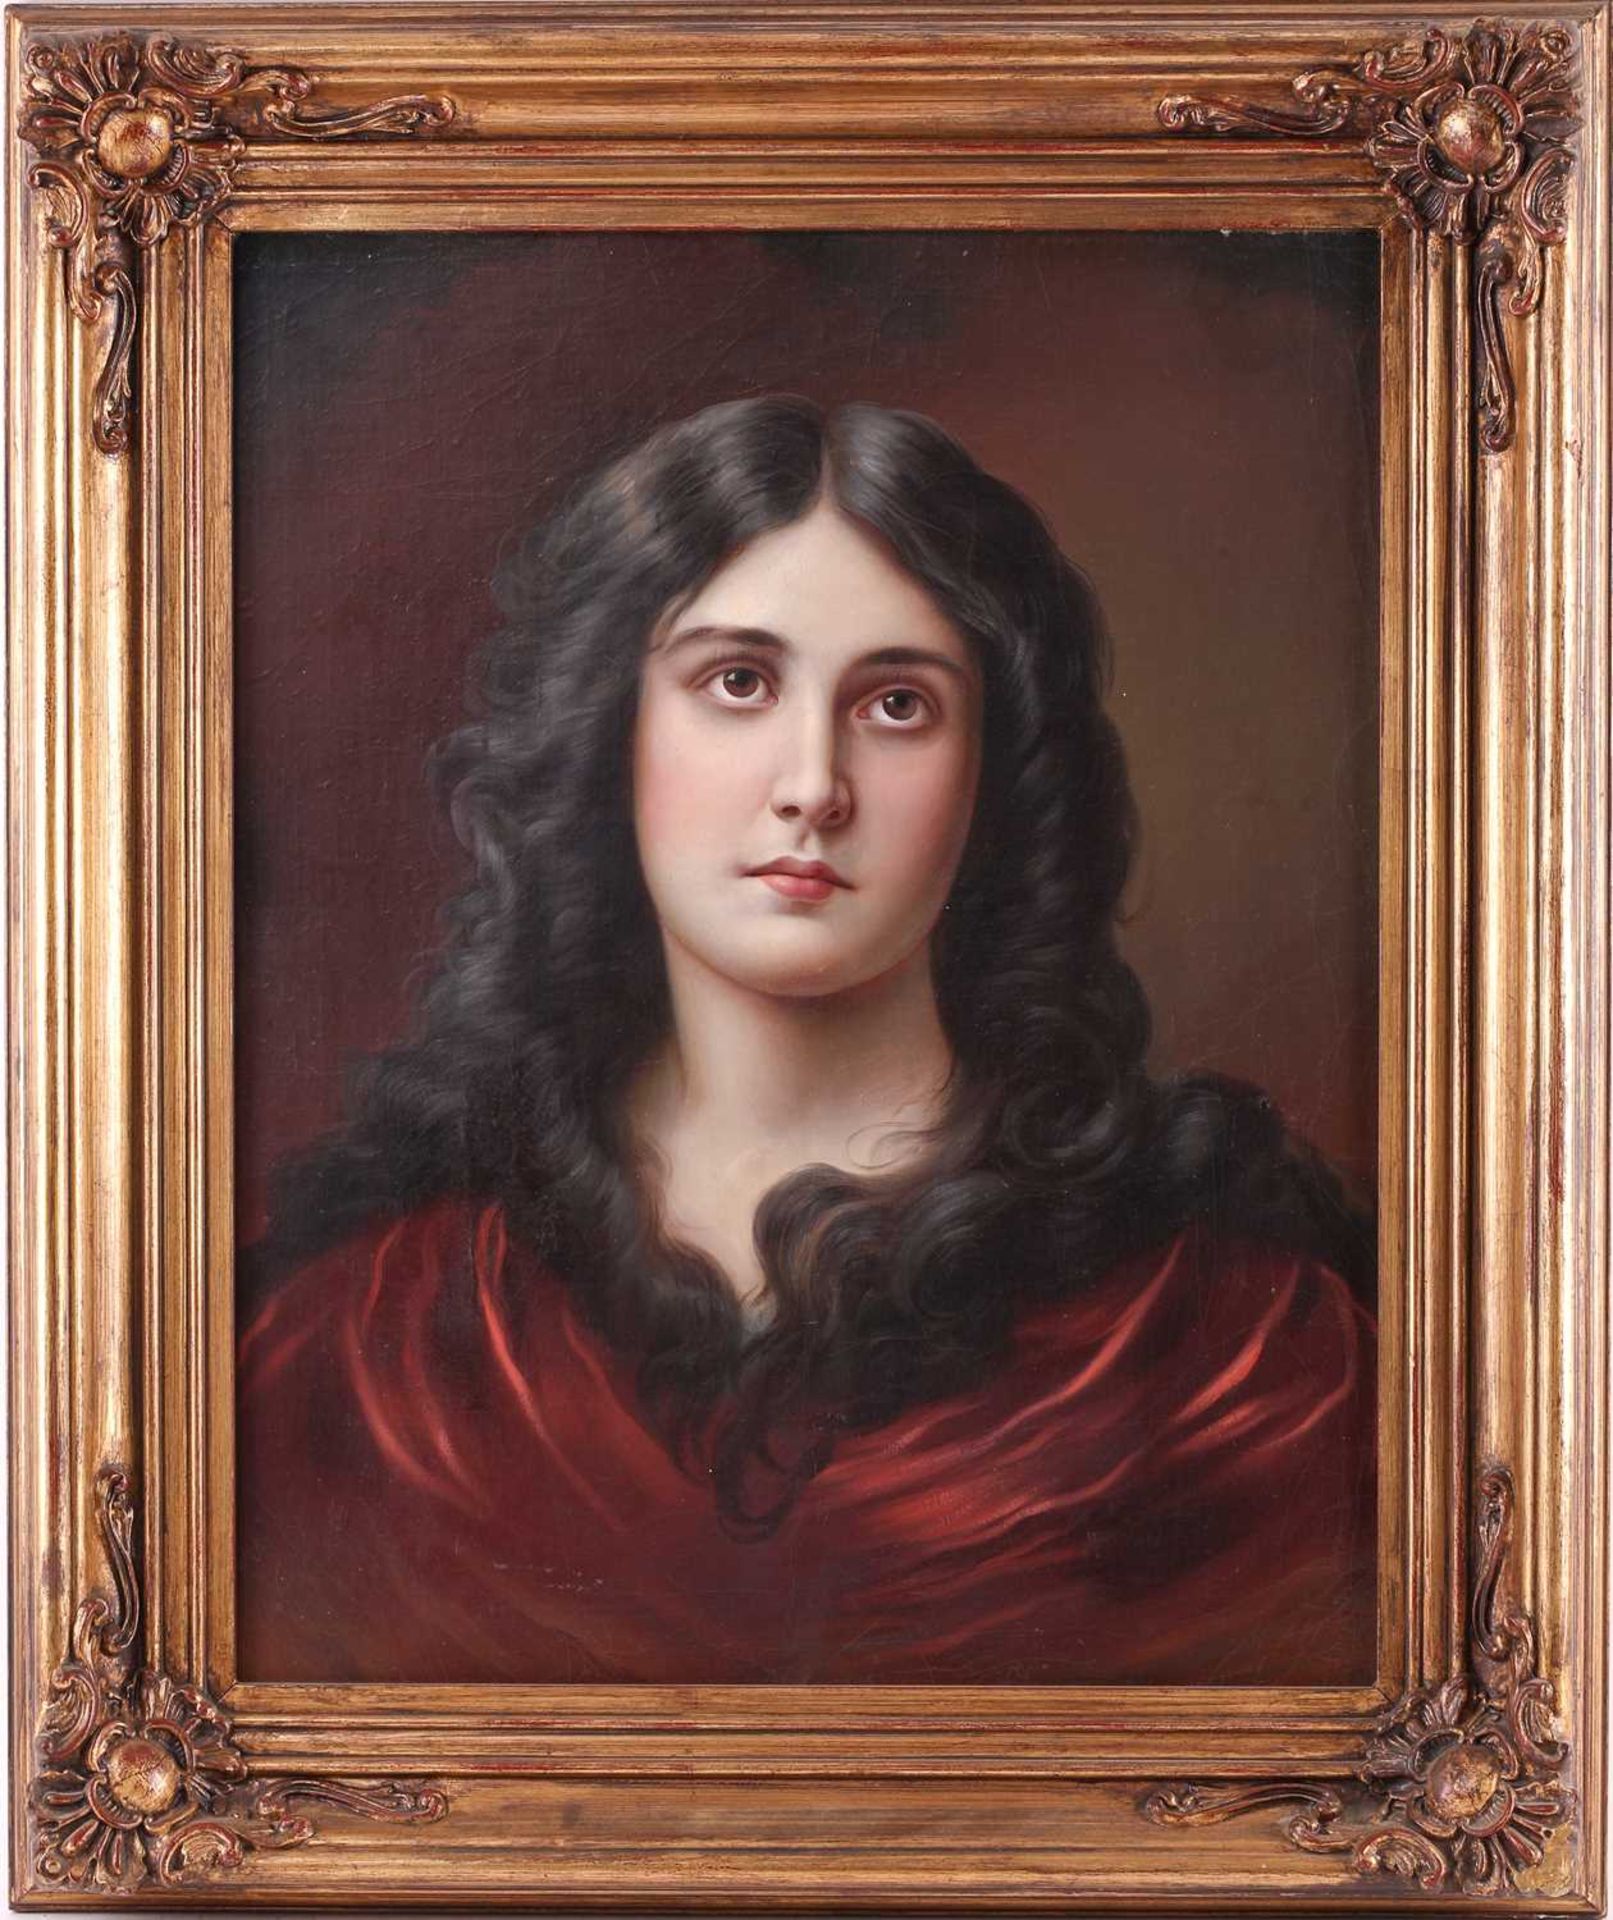 20th century Italian School, Bust length portrait of a lady with dark hair and red robe, unsigned, - Image 2 of 16